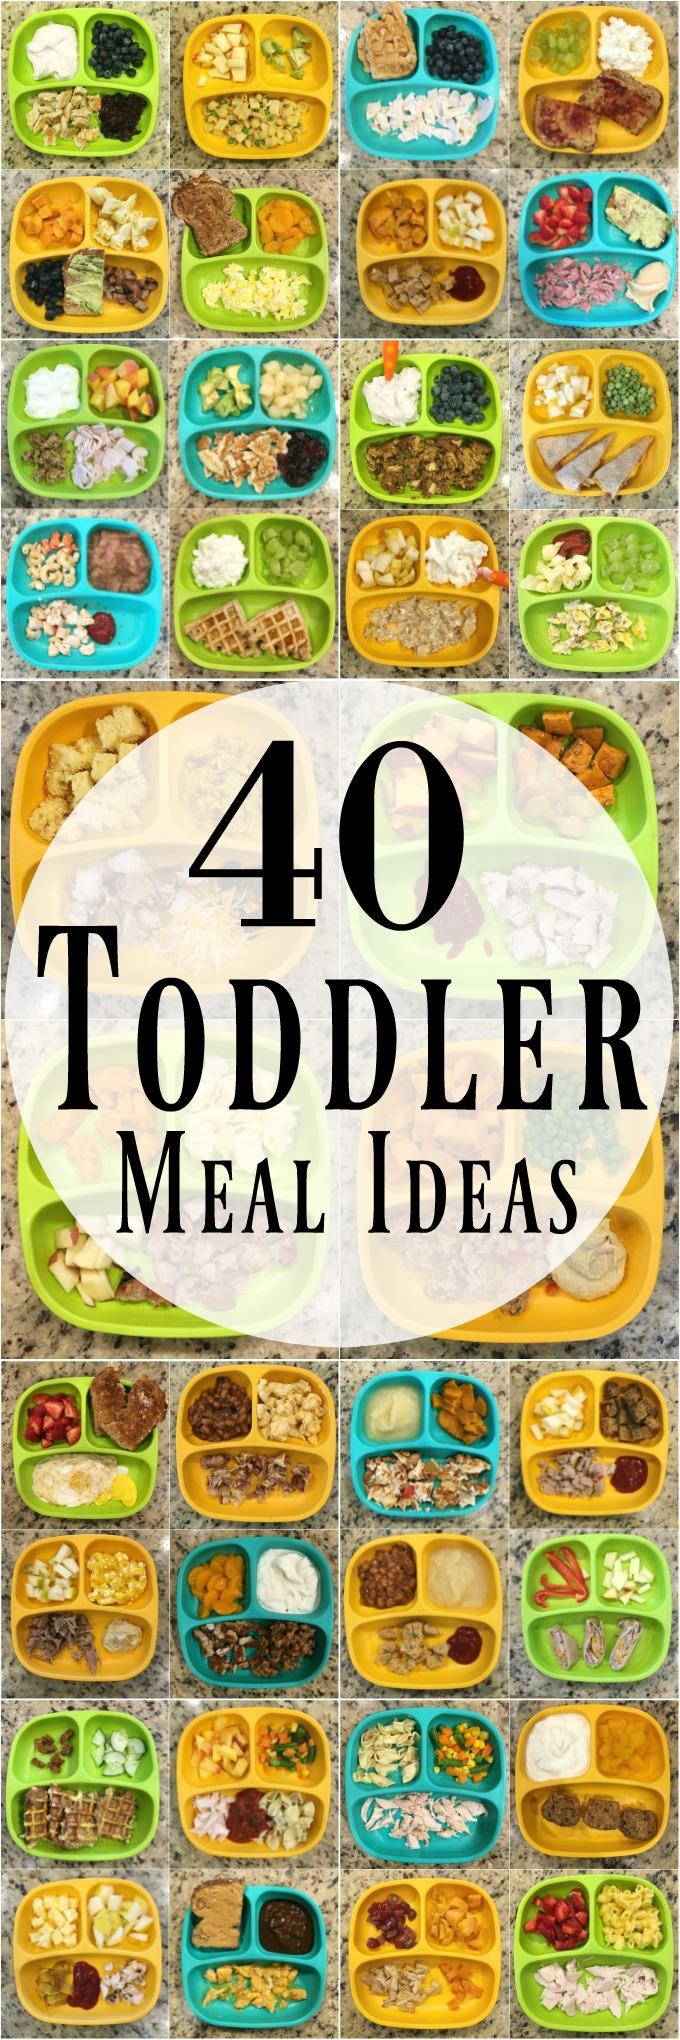 40 healthy toddler meals